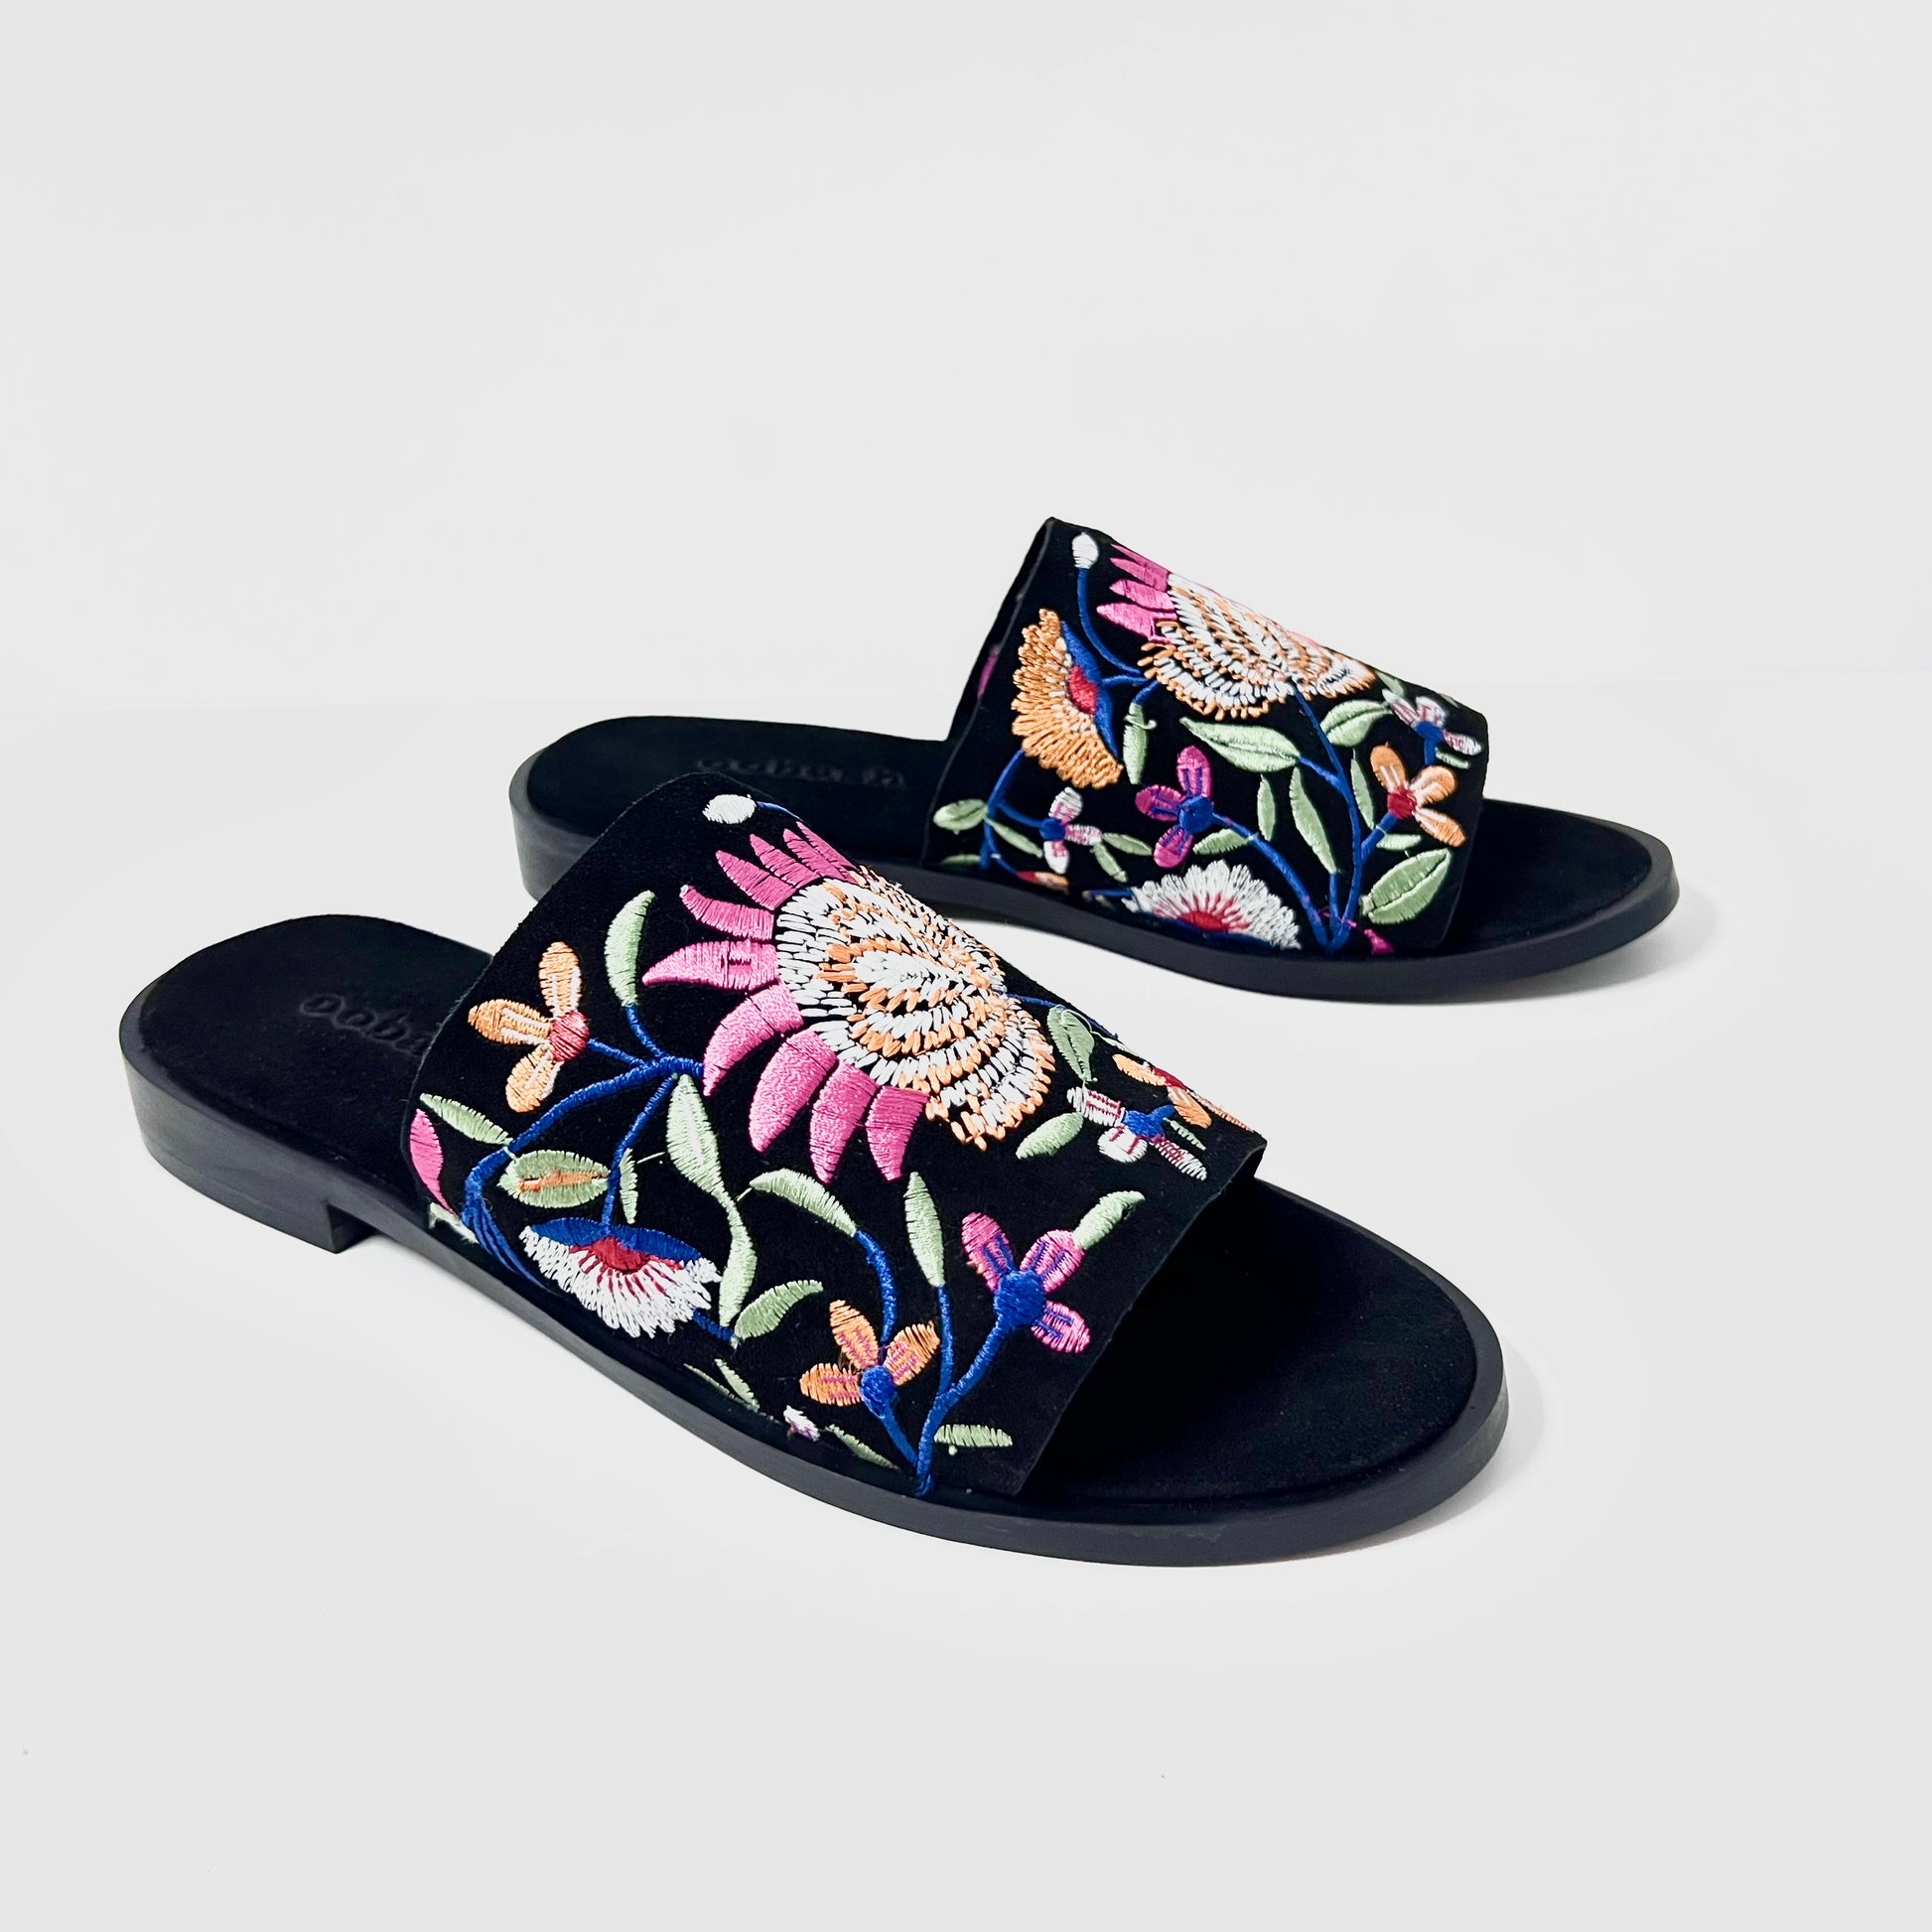 oobash Rose black embroidered suede leather Mule sandal